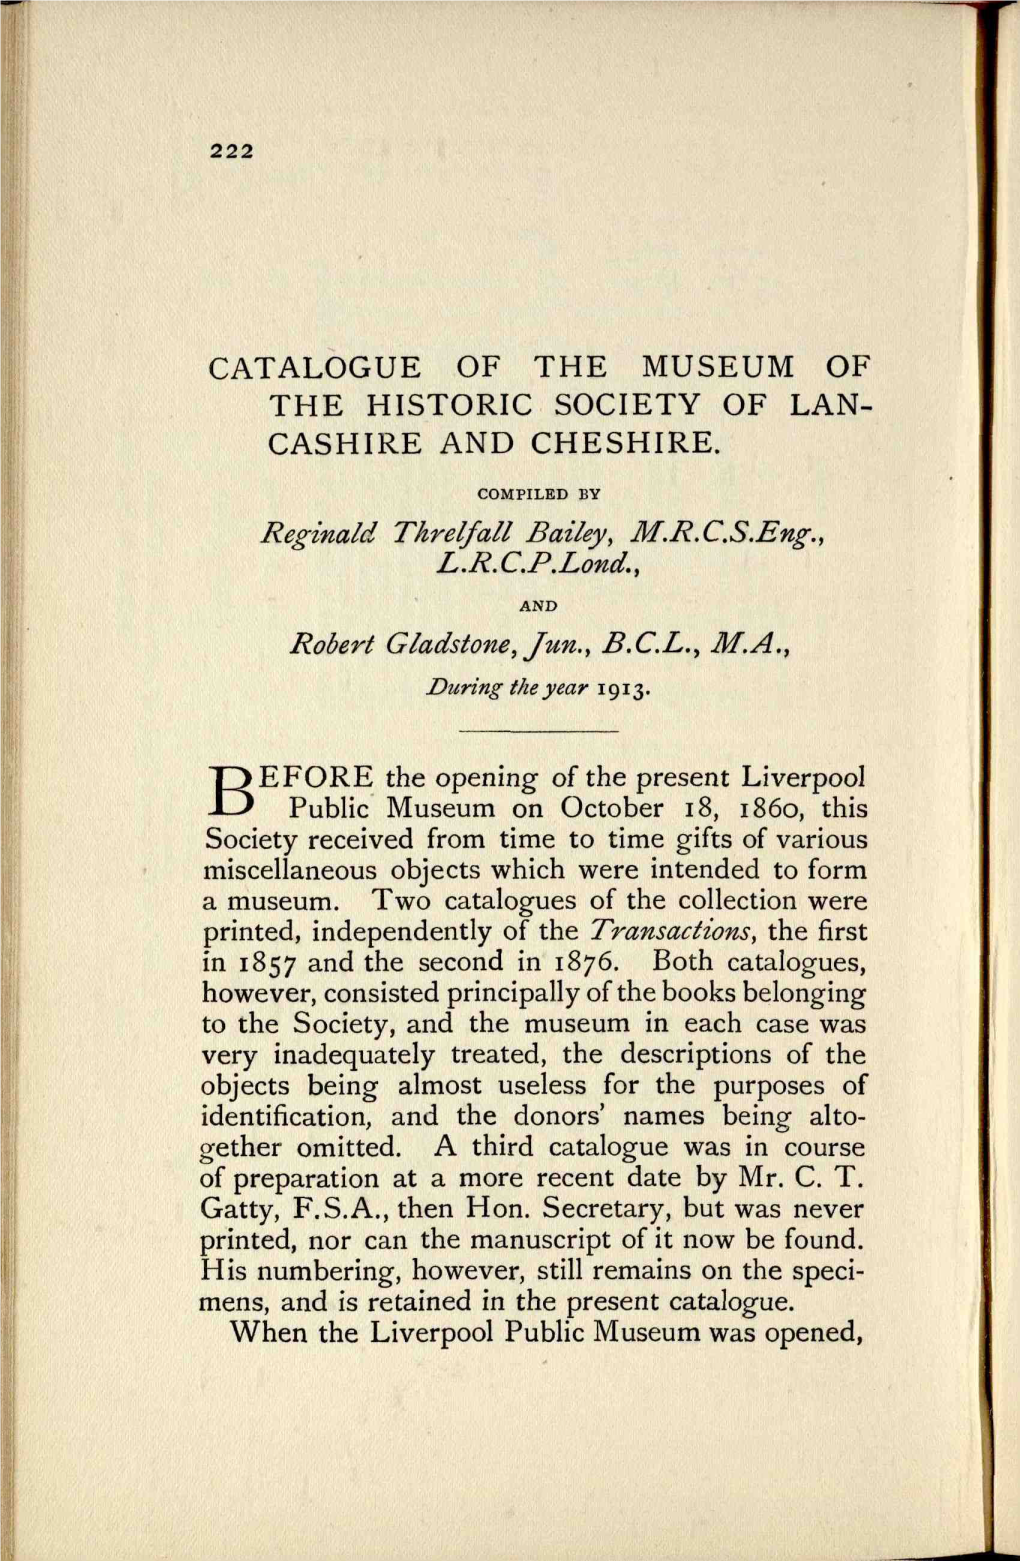 Catalogue of the Museum of the Historic Society of Lan­ Cashire and Cheshire